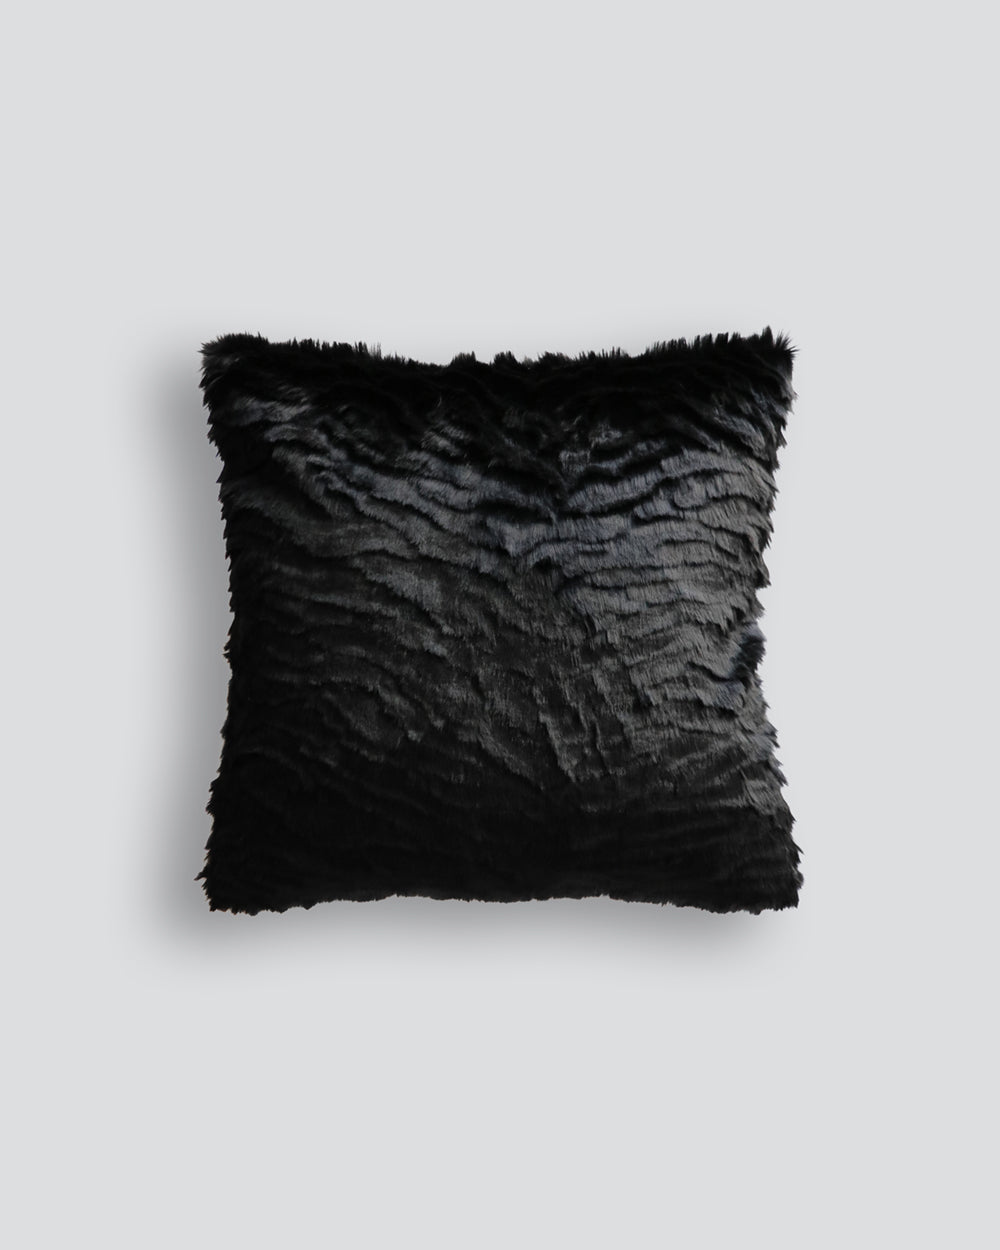 Heirloom Black Tiger Cushions in Faux Fur are available from Make Your House A Home Premium Stockist. Furniture Store Bendigo, Victoria. Australia Wide Delivery. Furtex Baya.